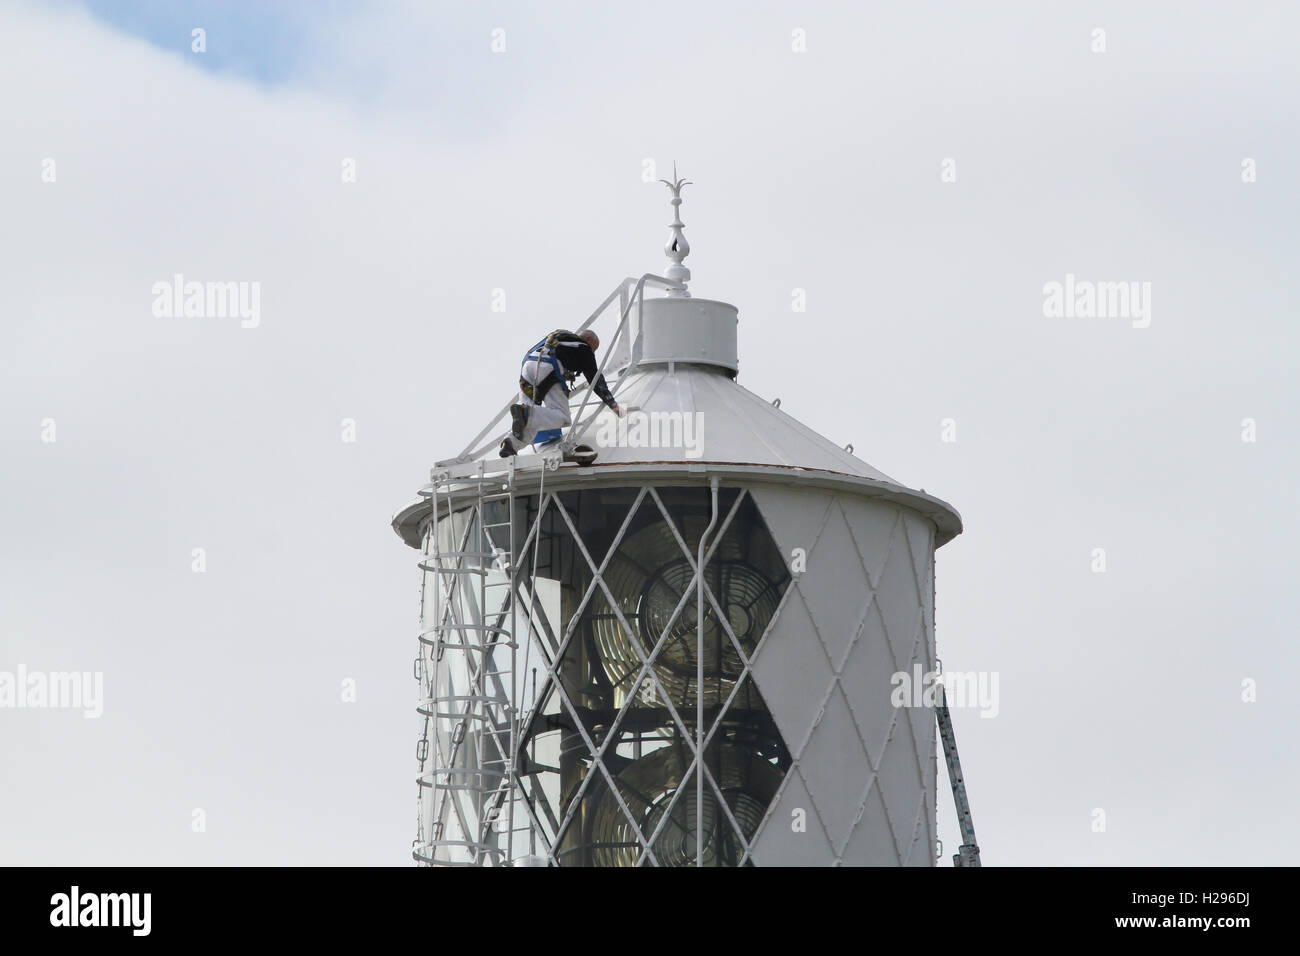 Safety harnesses and ropes whilst working at height in an unusual environment, painter painting the top of lighthouse at St John's Point Co Down. Stock Photo